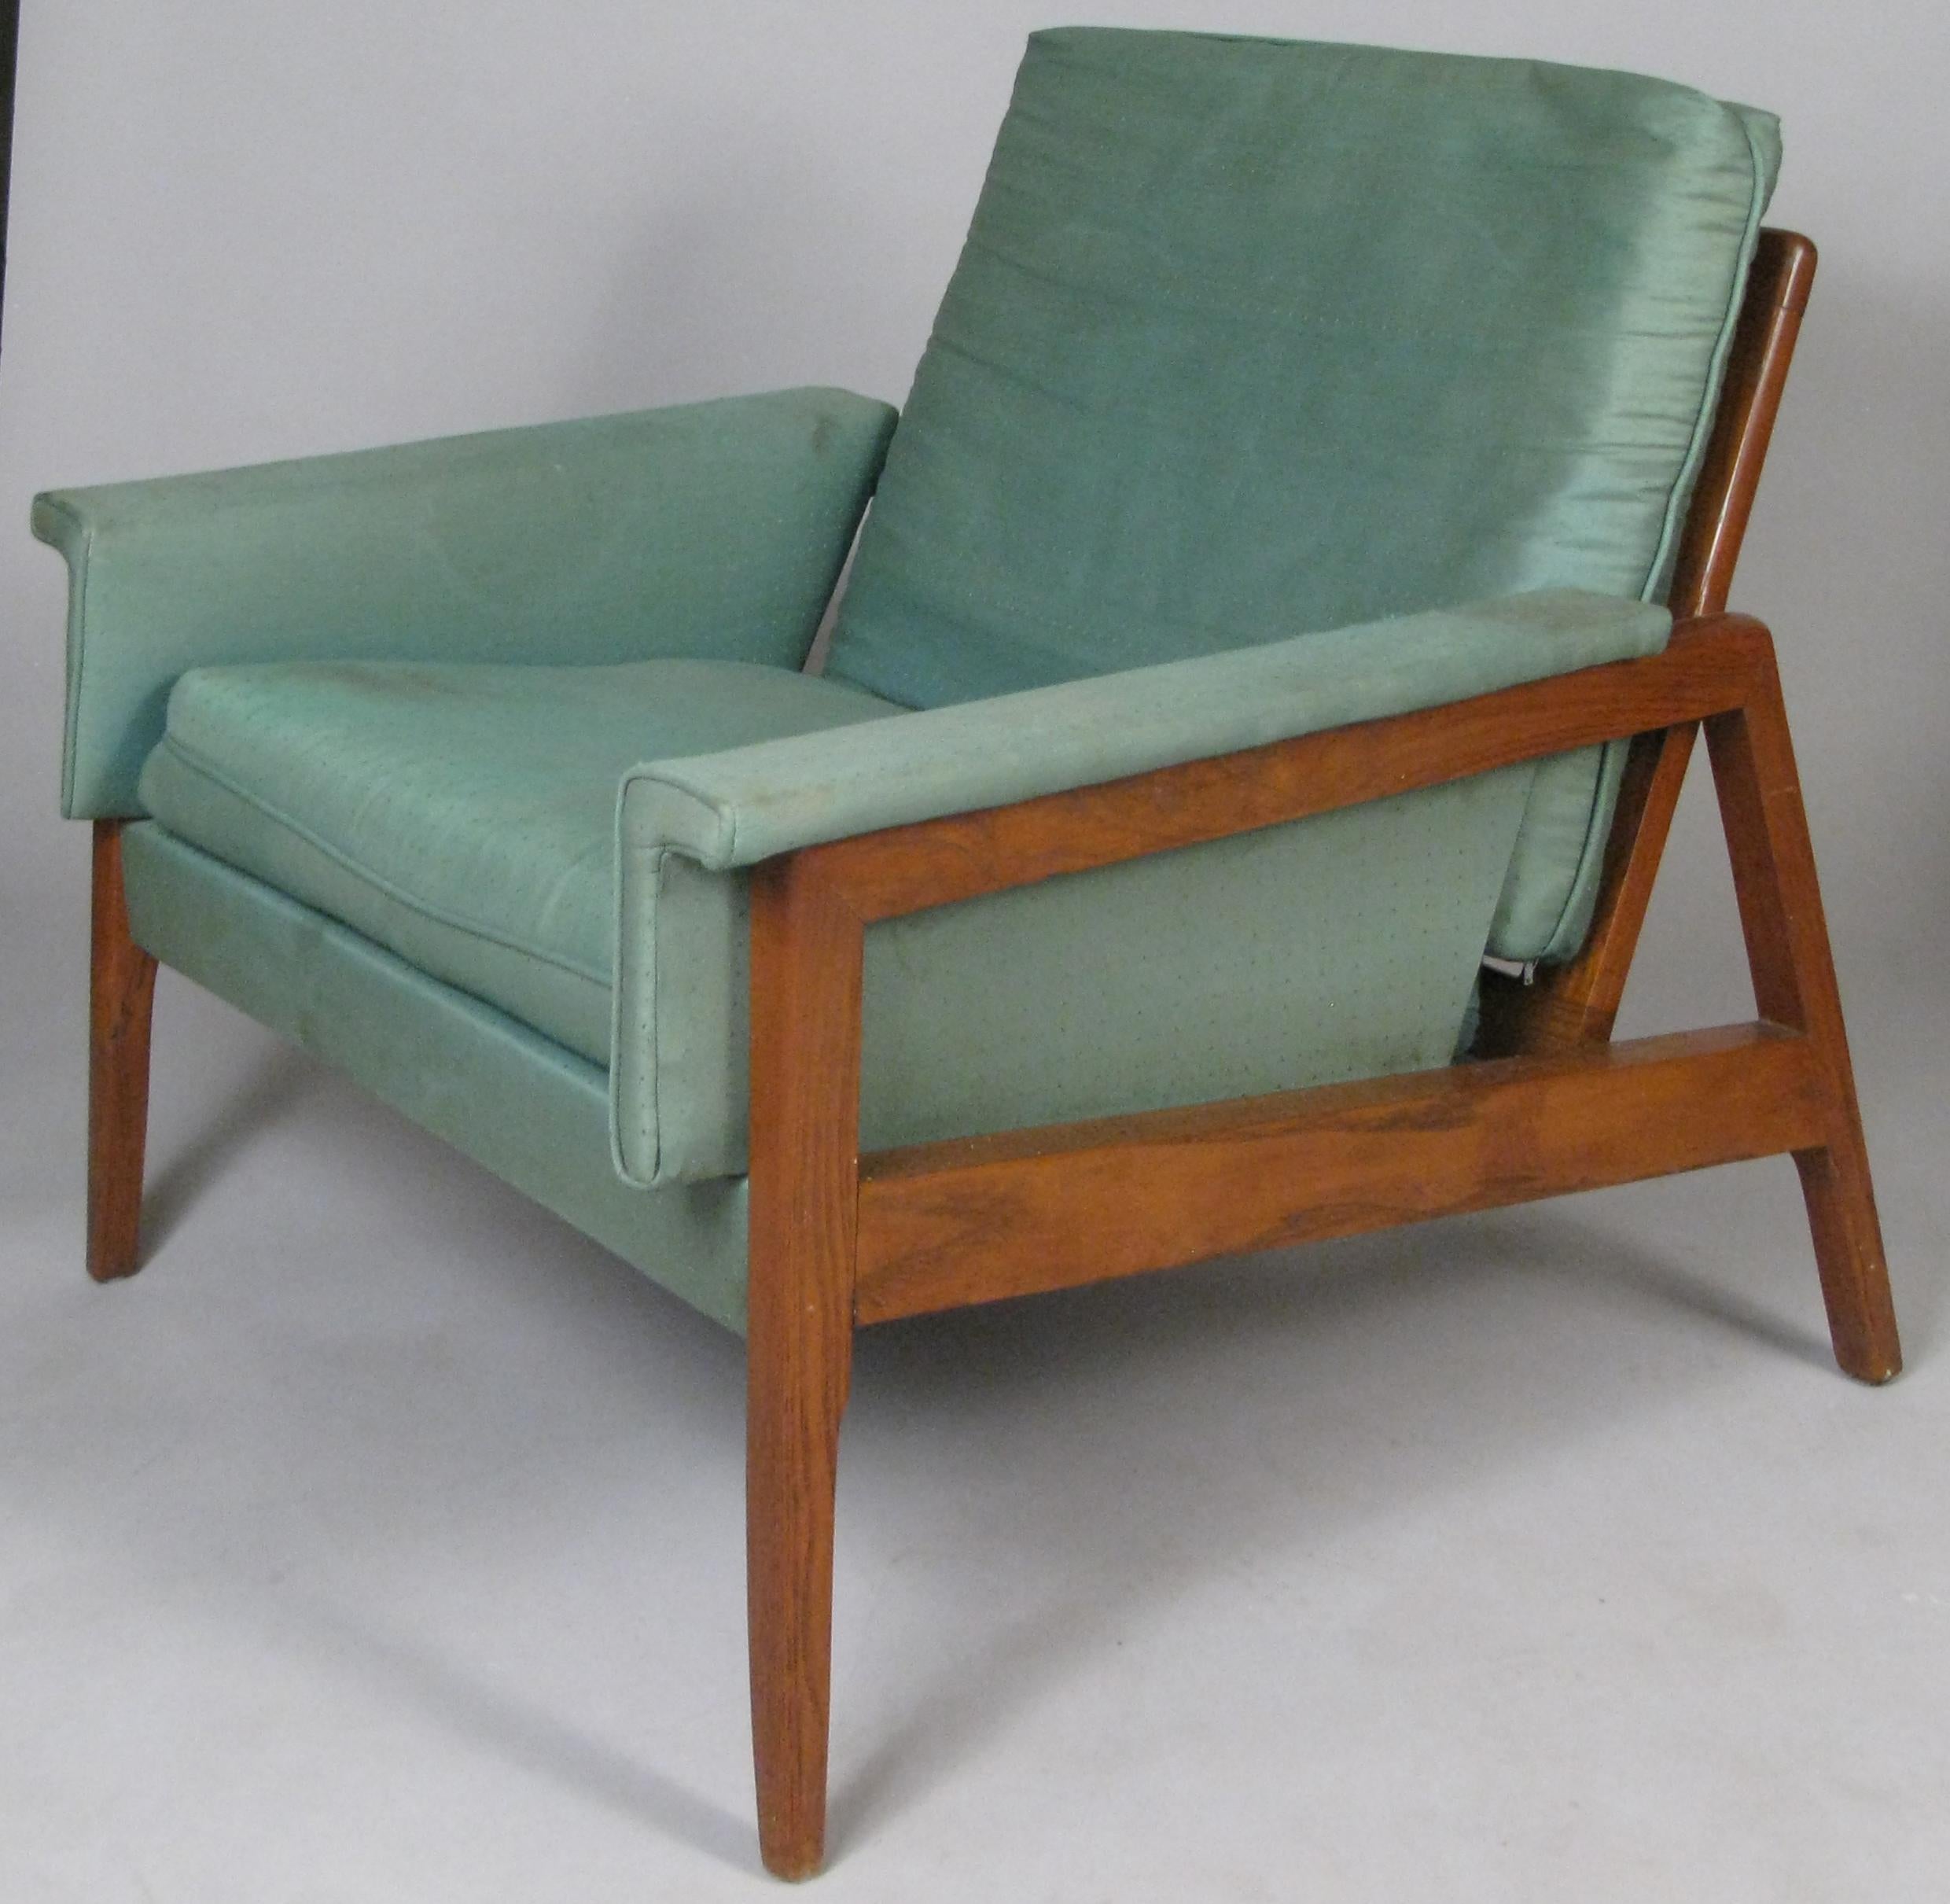 A pair of very handsome vintage 1950s American walnut frame lounge chairs, with angled legs and nice detail with the arm wrapping over the frame. These are in their original green silk upholstery, which is worn and will need to be reupholstered.